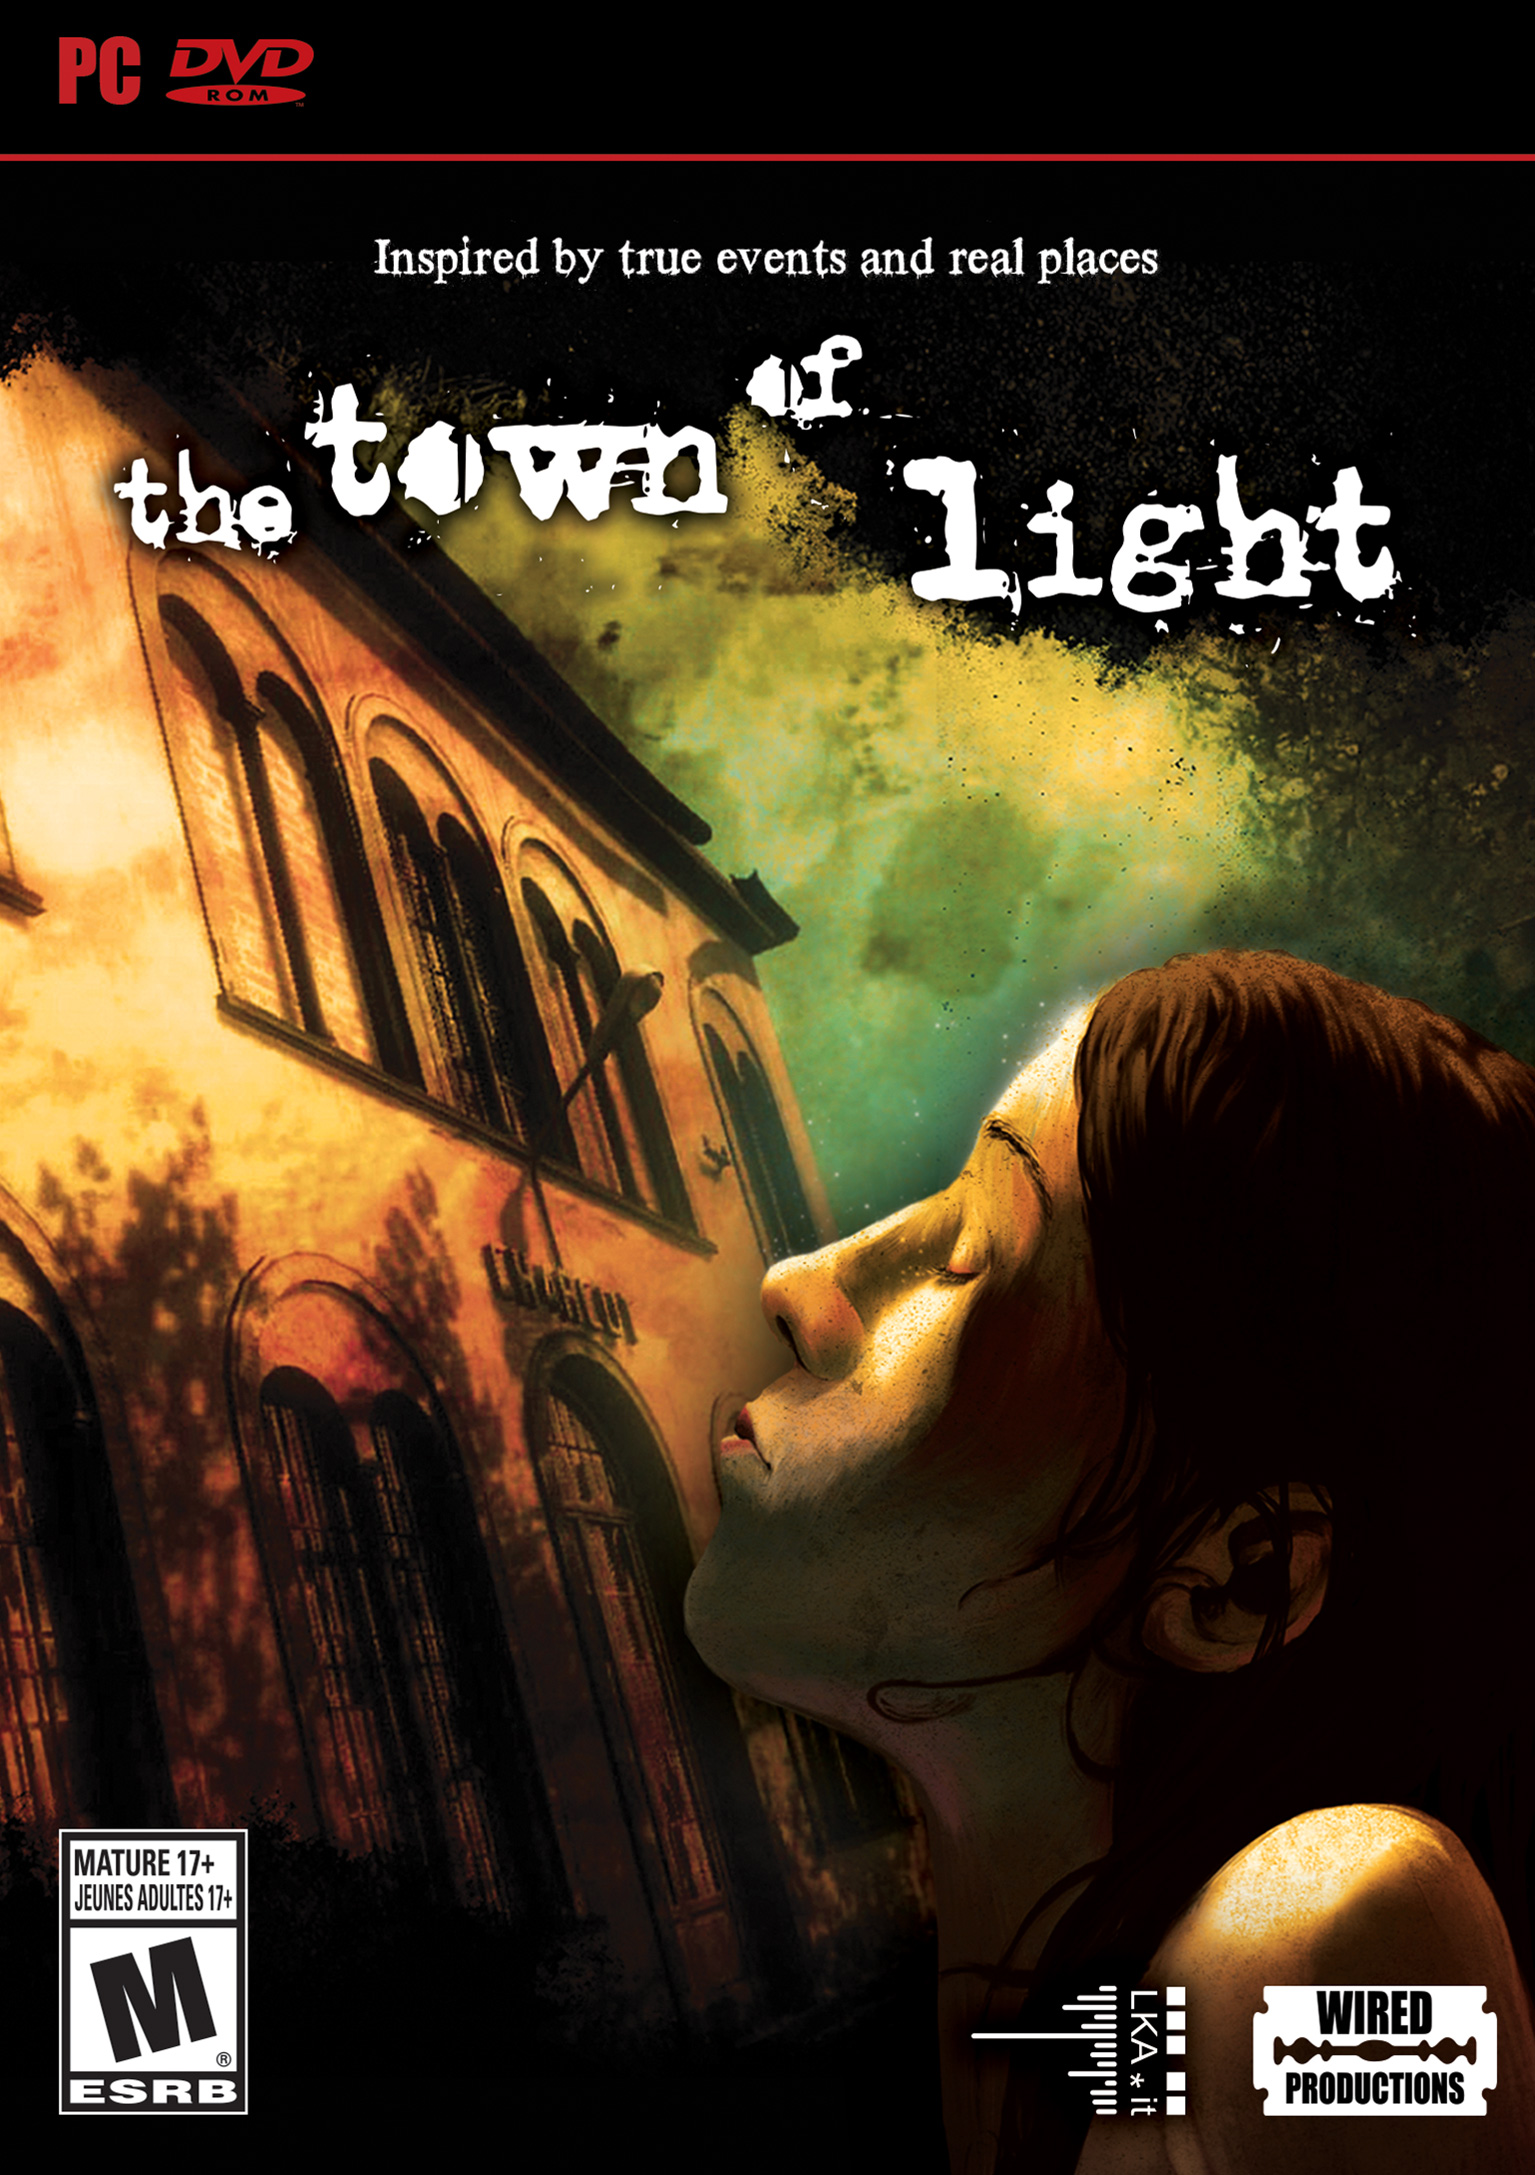 The Town of Light - pedn DVD obal